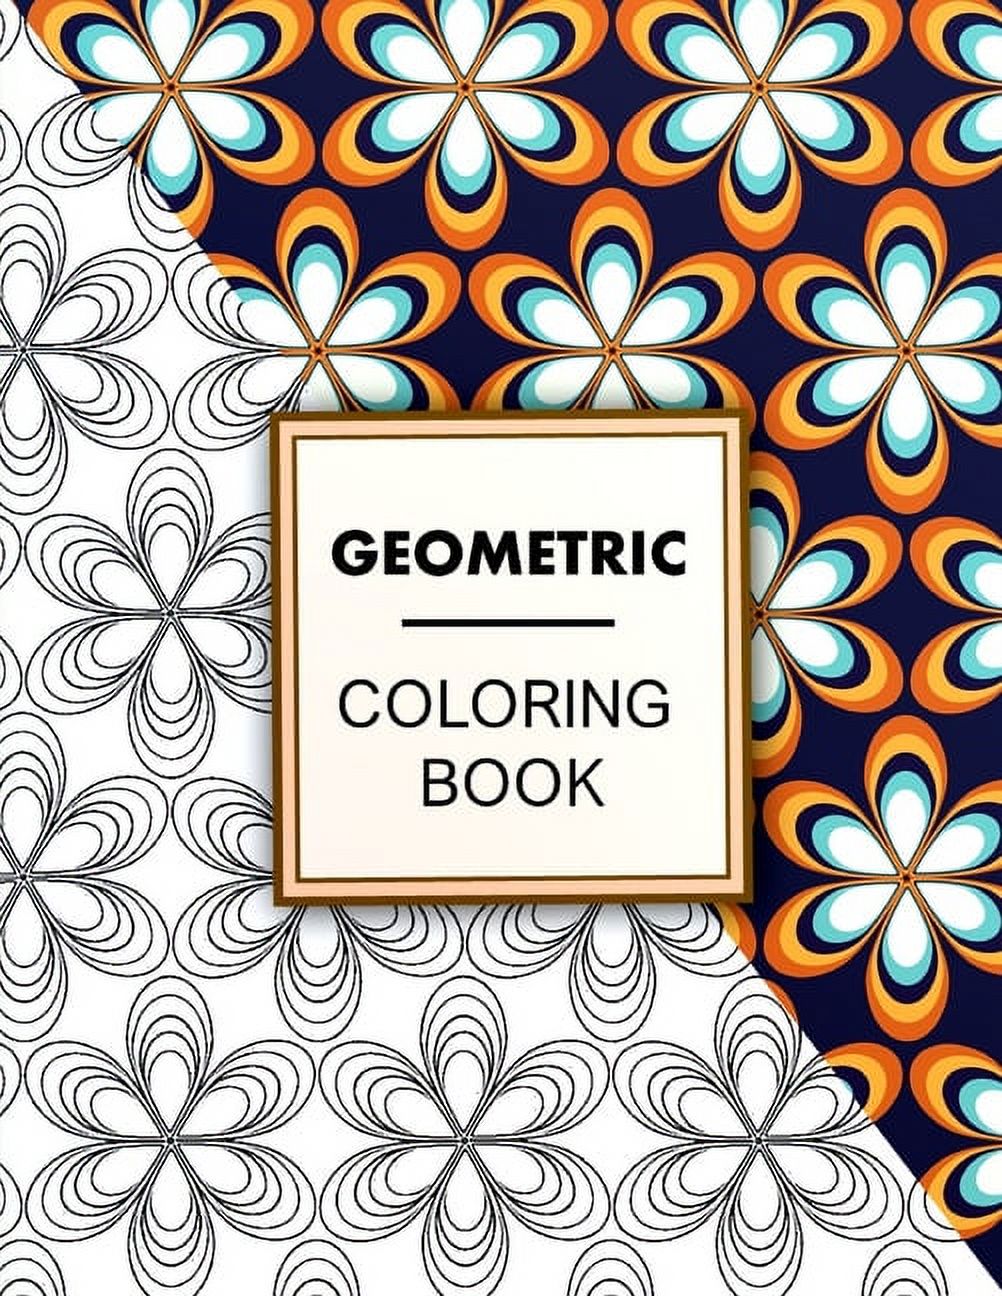 Geometric Coloring Book: Geometric Coloring Book For Adults Relaxation, Adult Coloring Pages with Geometric Designs, Geometric Patterns (Paperback) - image 1 of 1